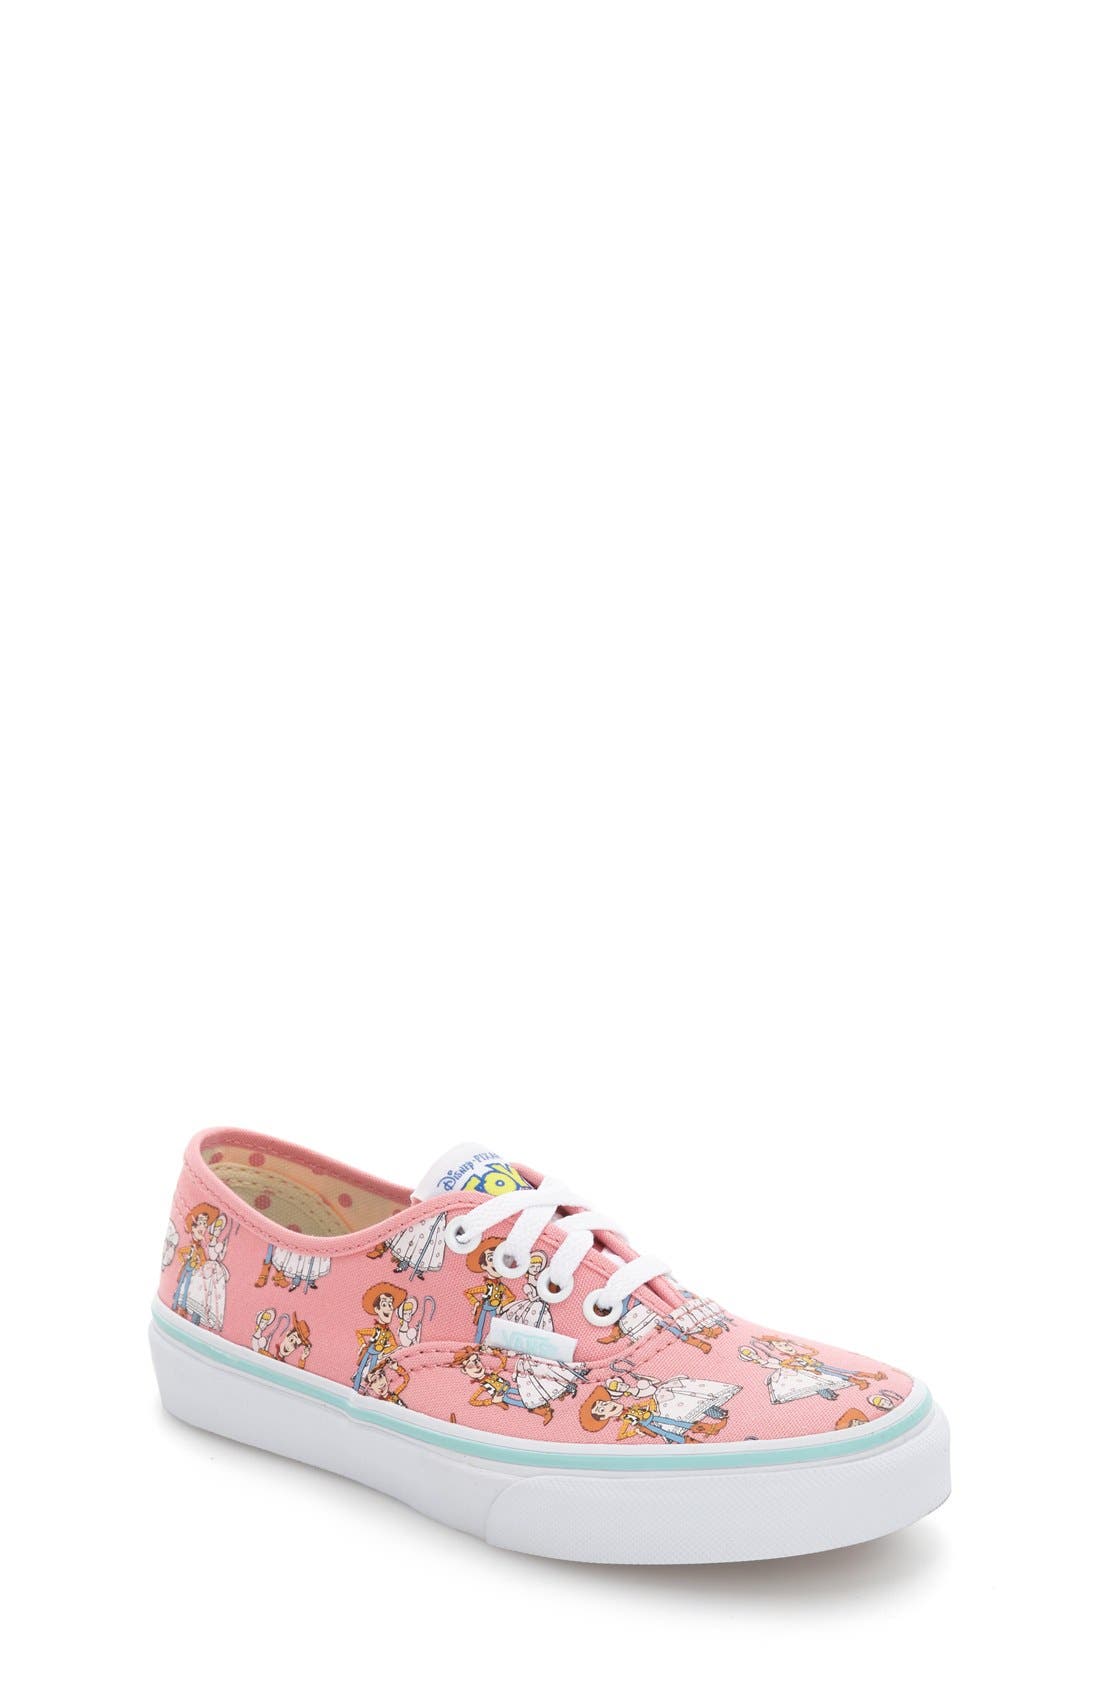 toy story vans womens size 8